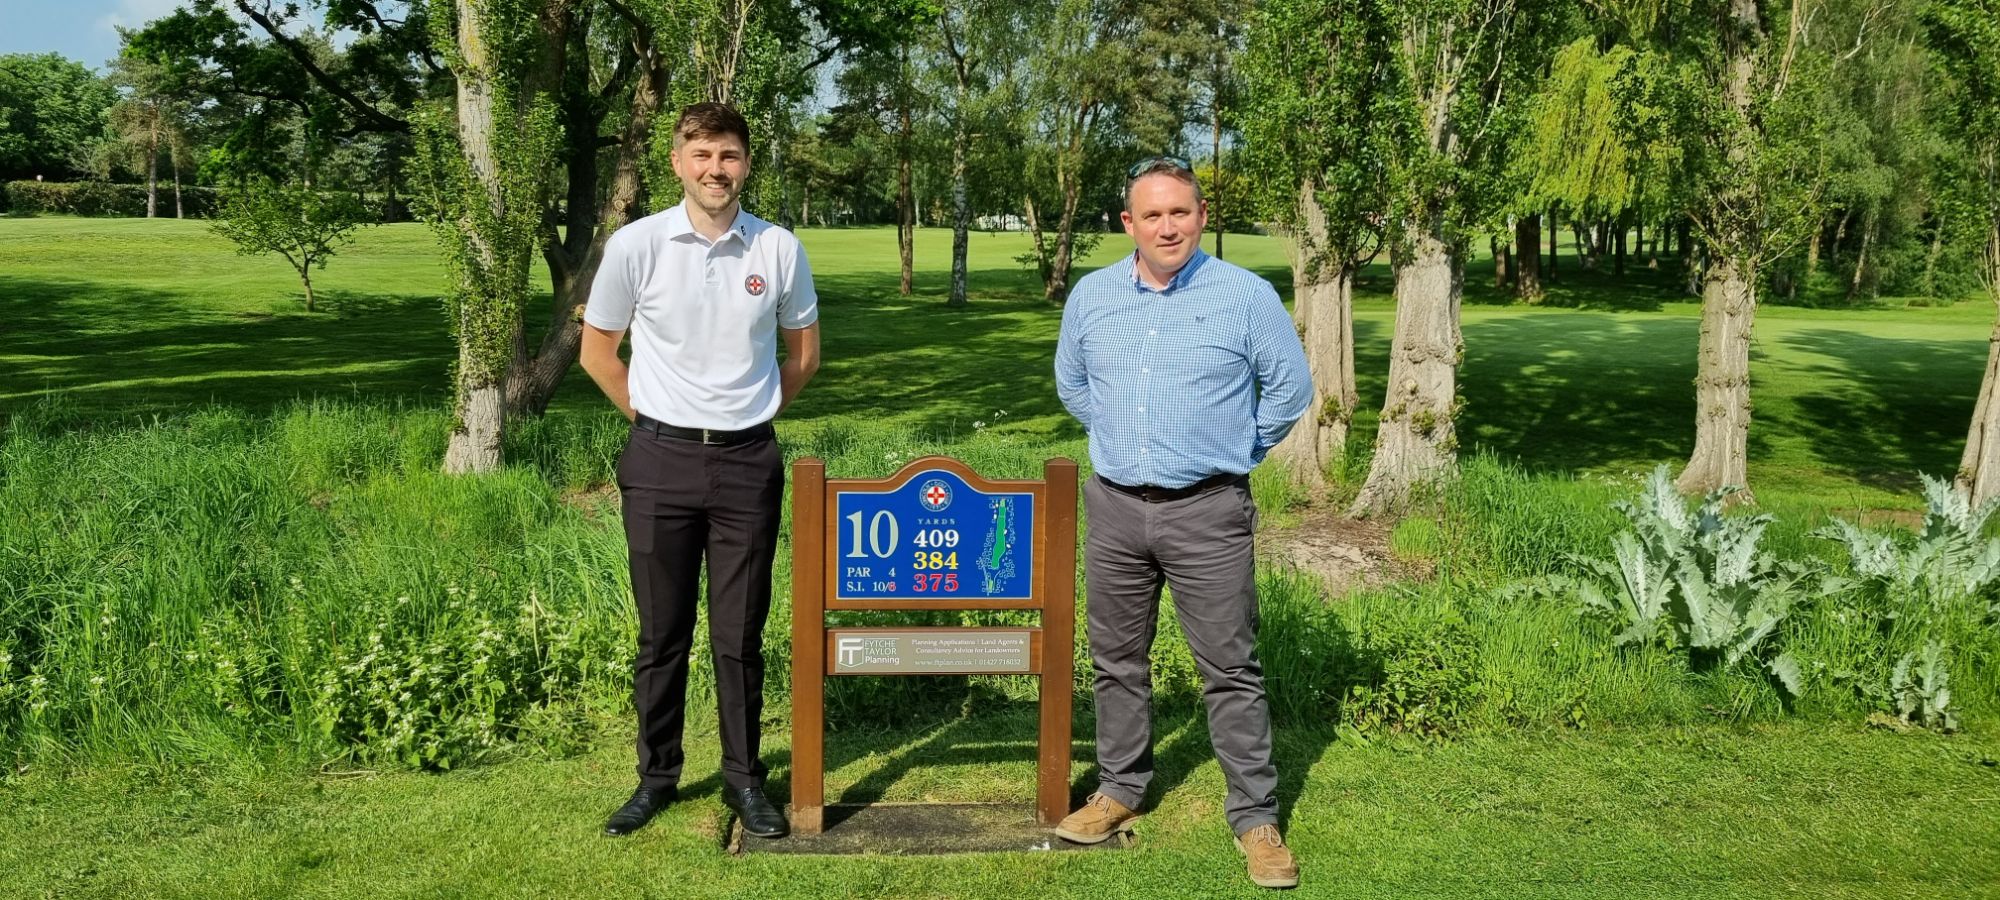 Lincoln Golf Club is based at Torksey near Lincoln. Fytche-Taylor Planning are proud to be course sponsors at this beautiful and unique course. 